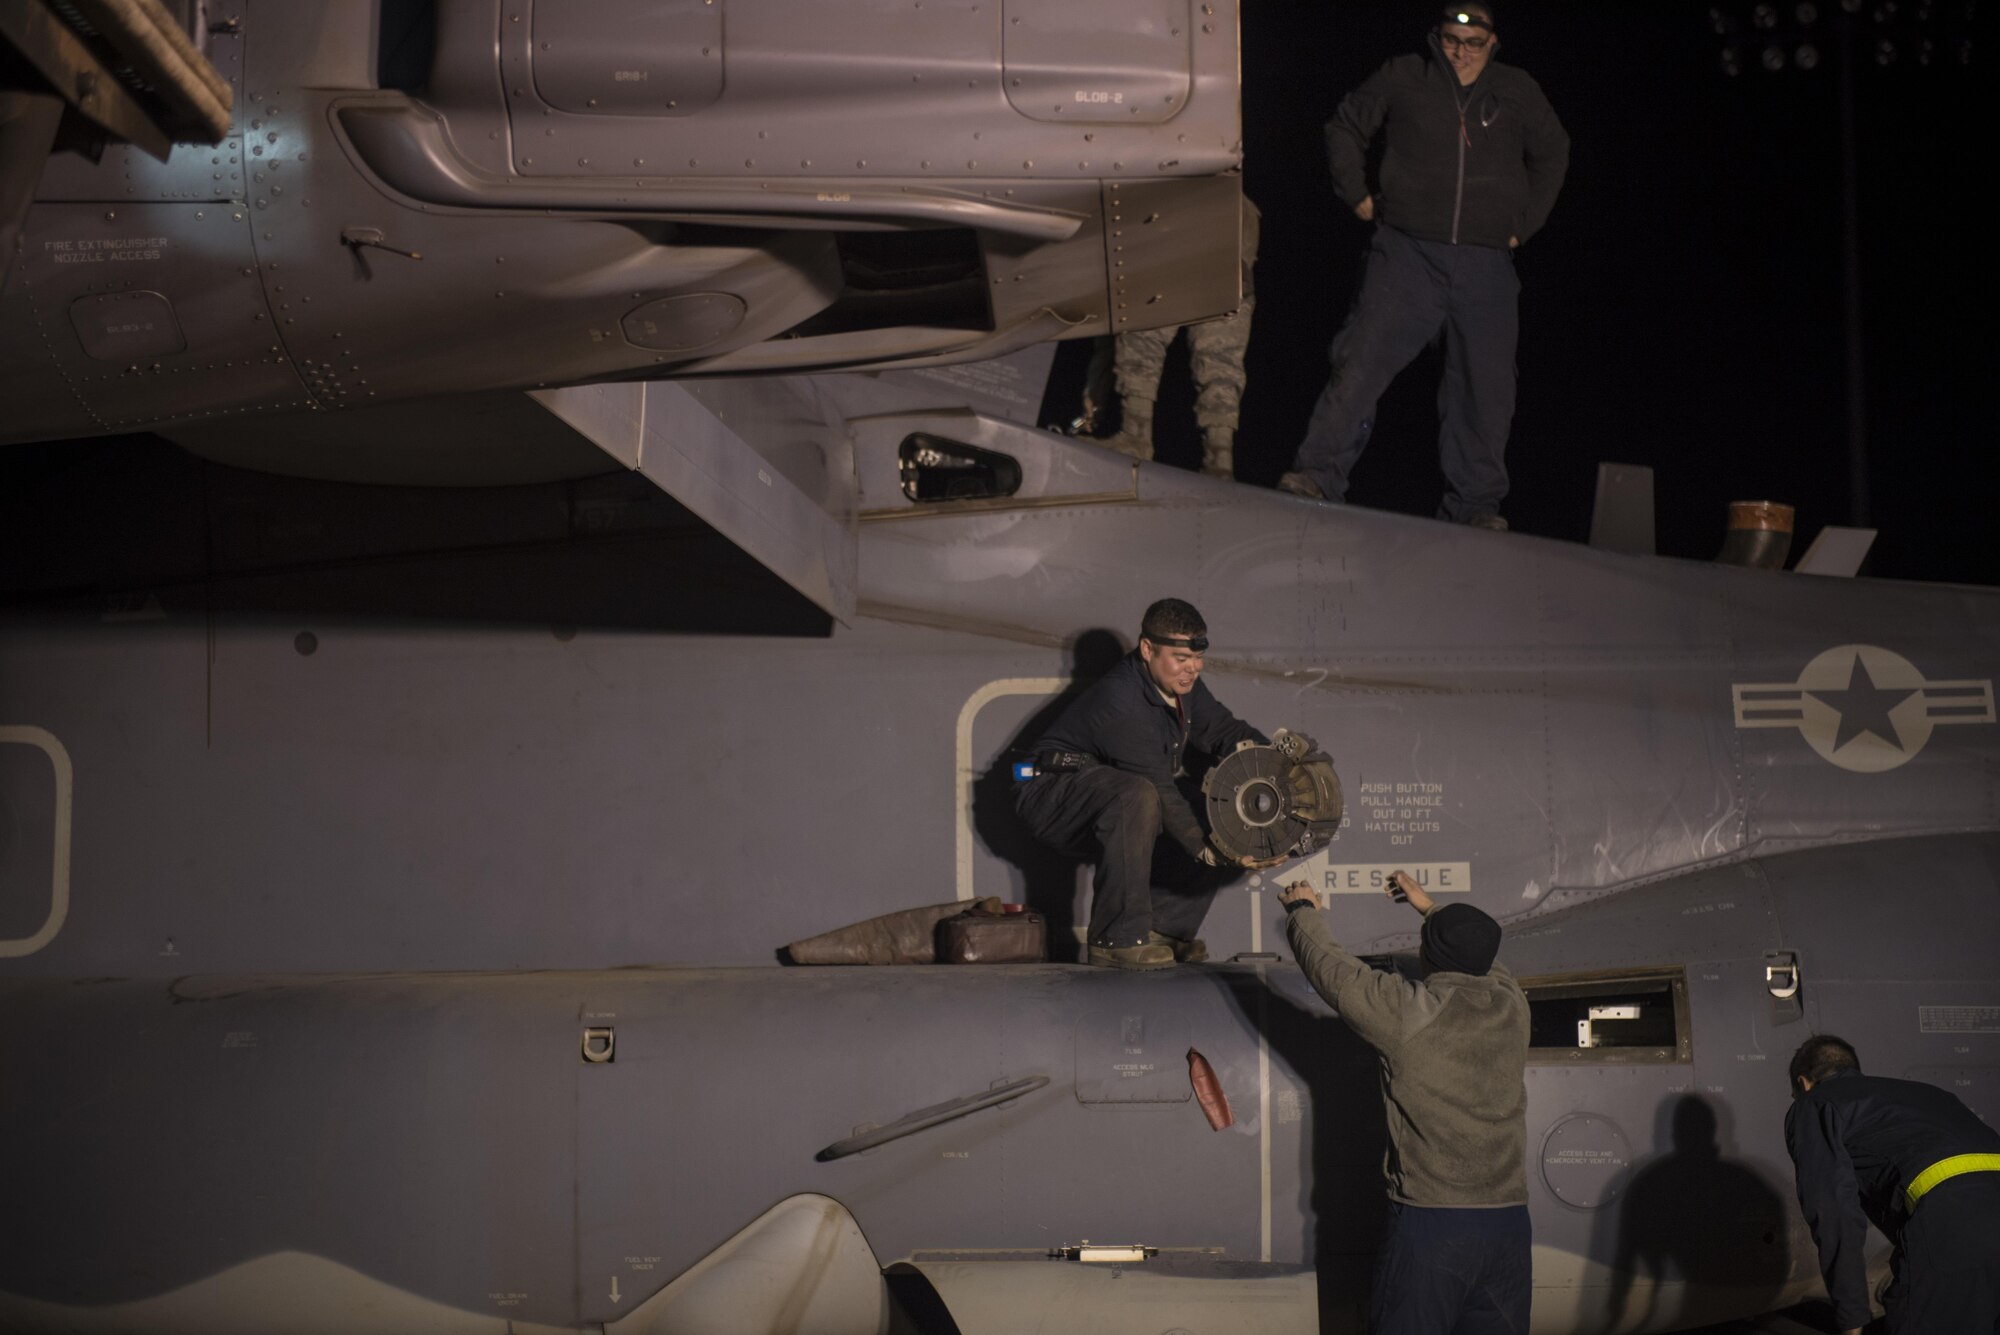 Crew chiefs with the 20th Aircraft Maintenance Unit, 727th Special Operations Aircraft Maintenance Squadron work through the night inspecting and repairing CV-22 Ospreys Oct. 18, 2016 at Cannon Air Force Base, N.M. The 20th Aircraft Maintenance Unit is one of many shops at Cannon that operates 24 hours a day, keeping the 27th Special Operations Wing ready, relevant and resilient any time, any place. (U.S. Air Force Photo by Senior Airman Shelby Kay-Fantozzi/released)